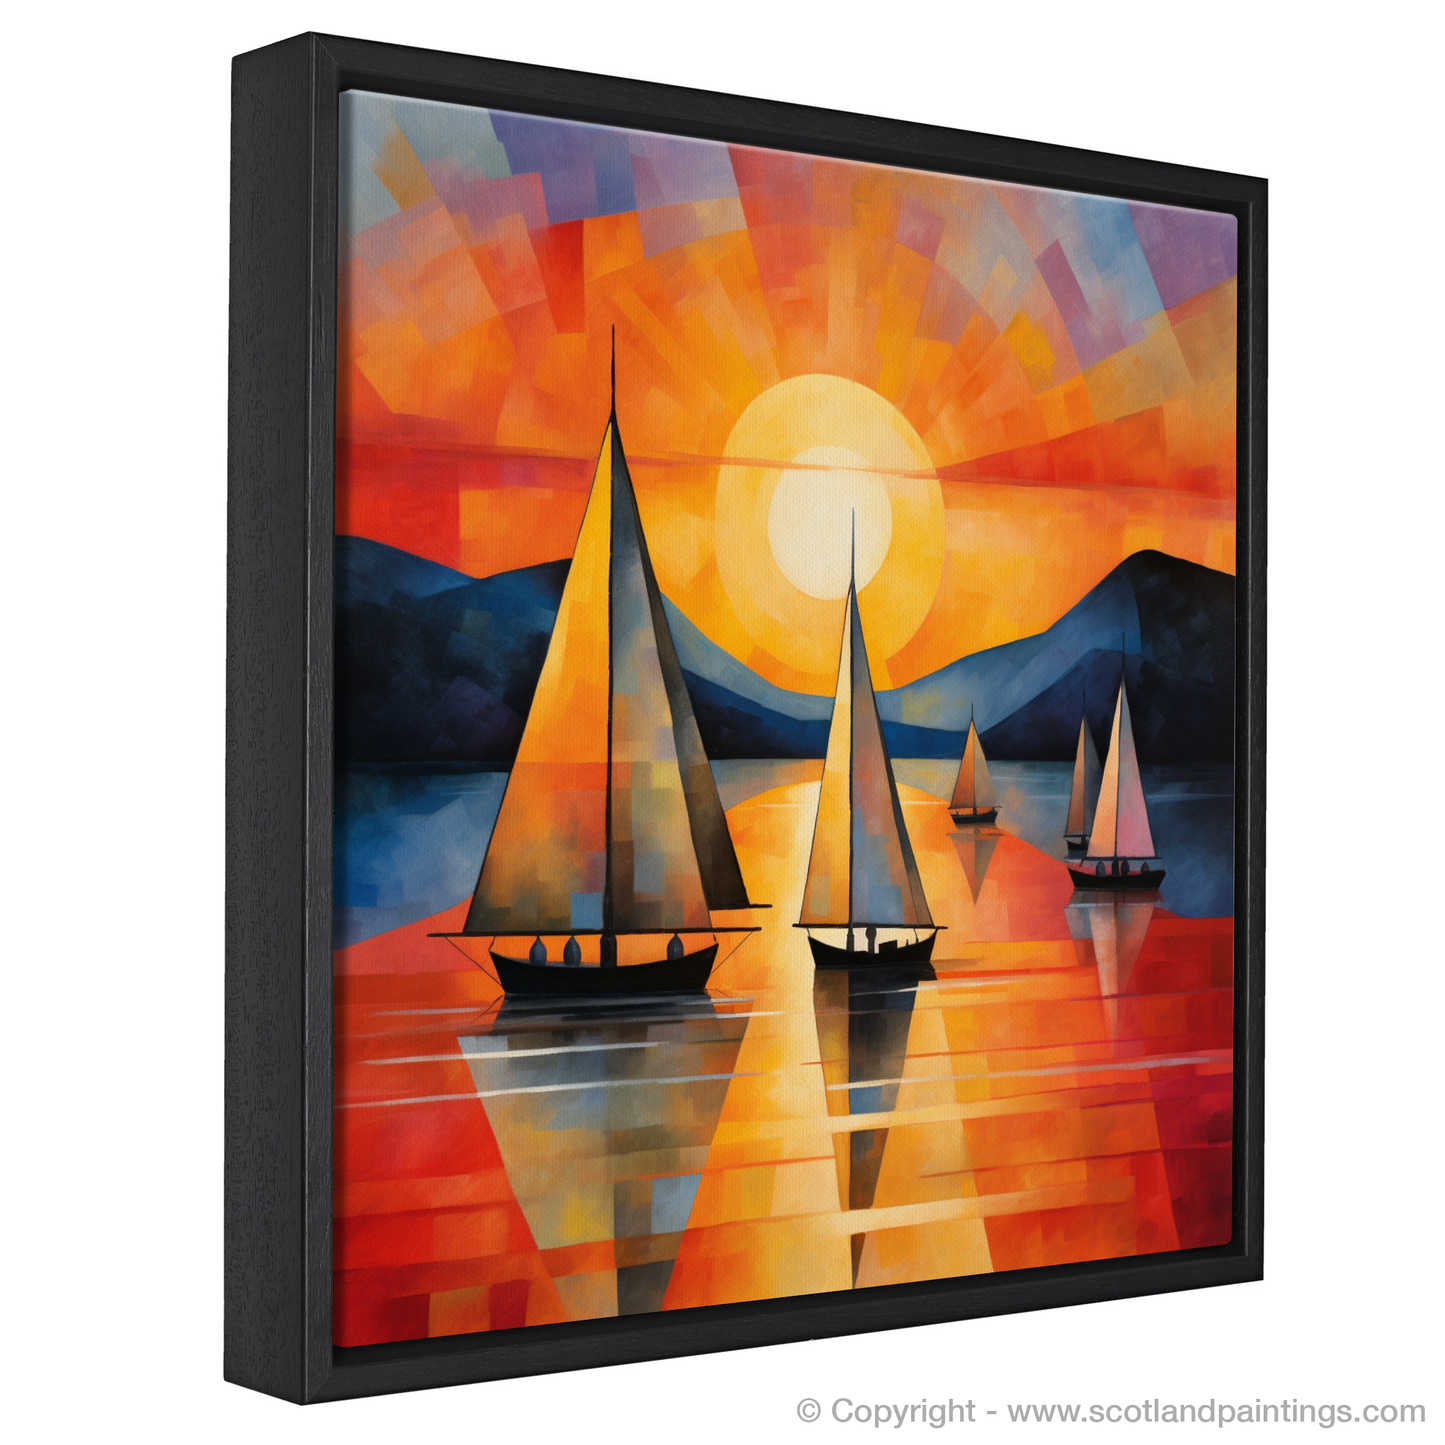 Painting and Art Print of Sailing boats on Loch Lomond at sunset entitled "Sailing into the Sunset: A Cubist Tribute to Loch Lomond".